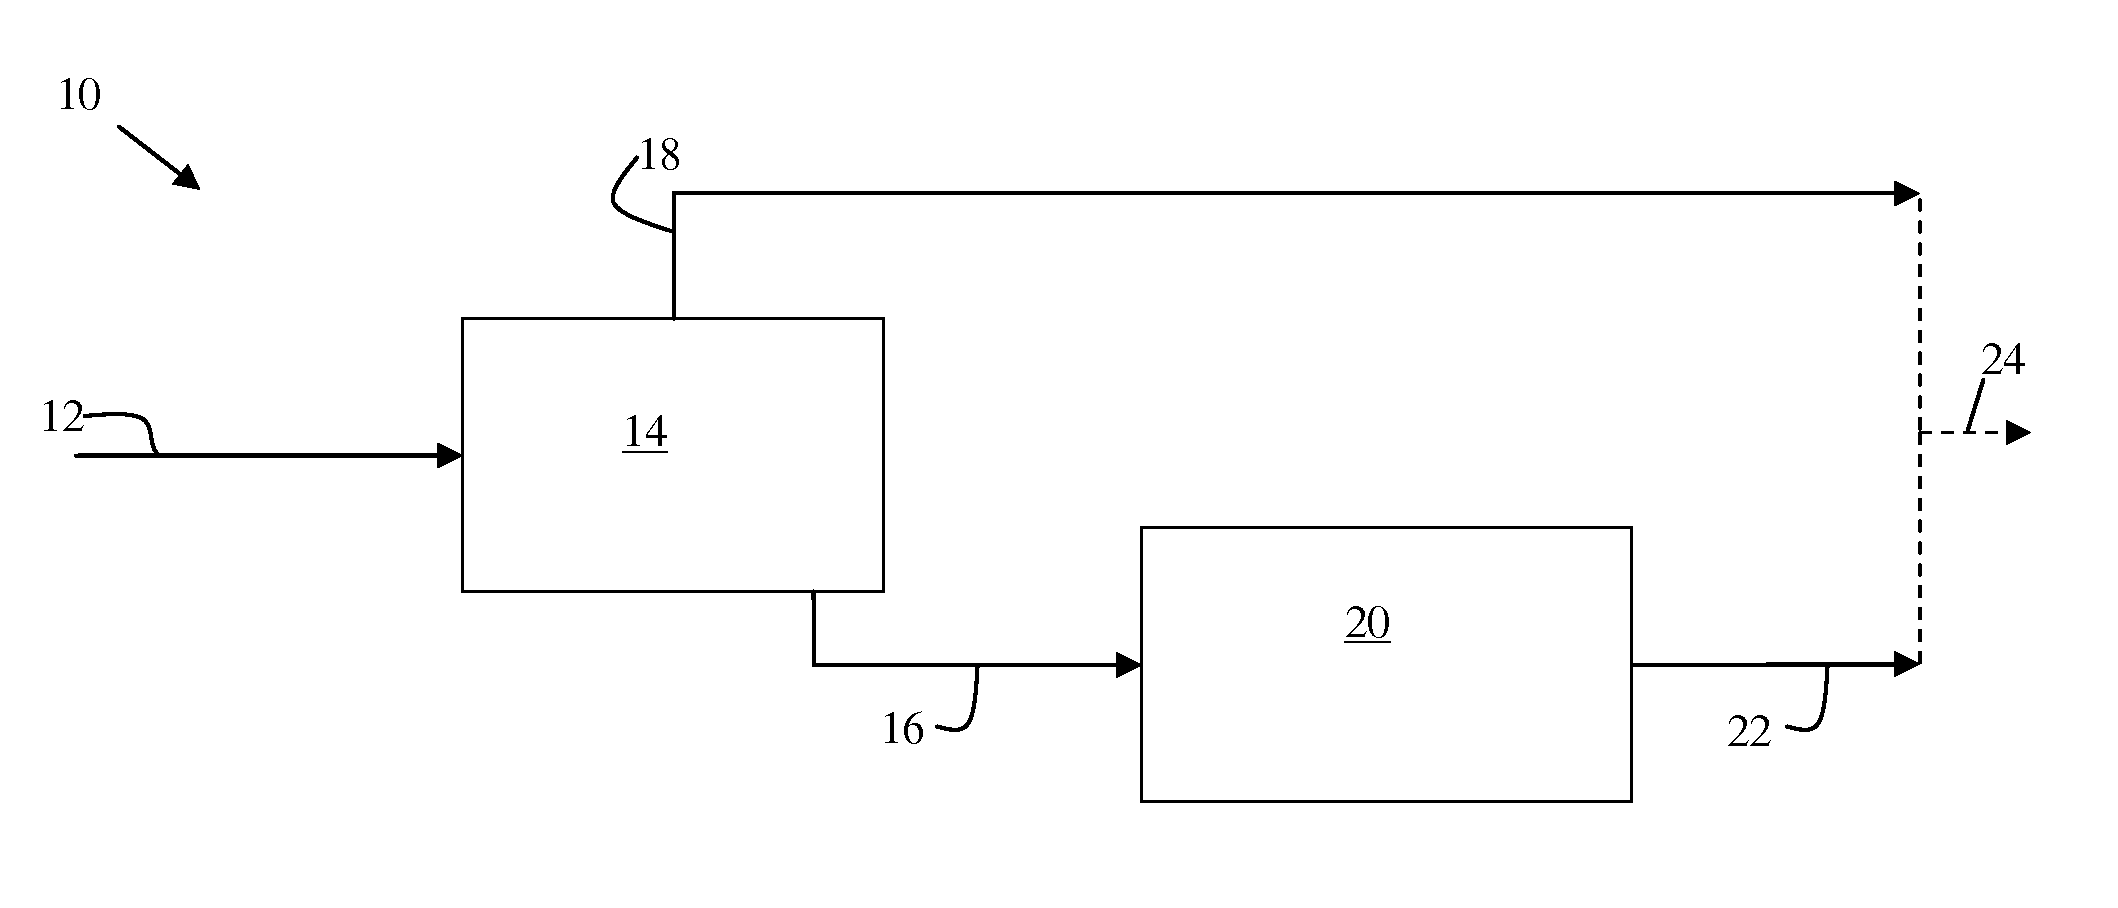 Membrane desulfurization of liquid hydrocarbons using an extractive liquid membrane contactor system and method